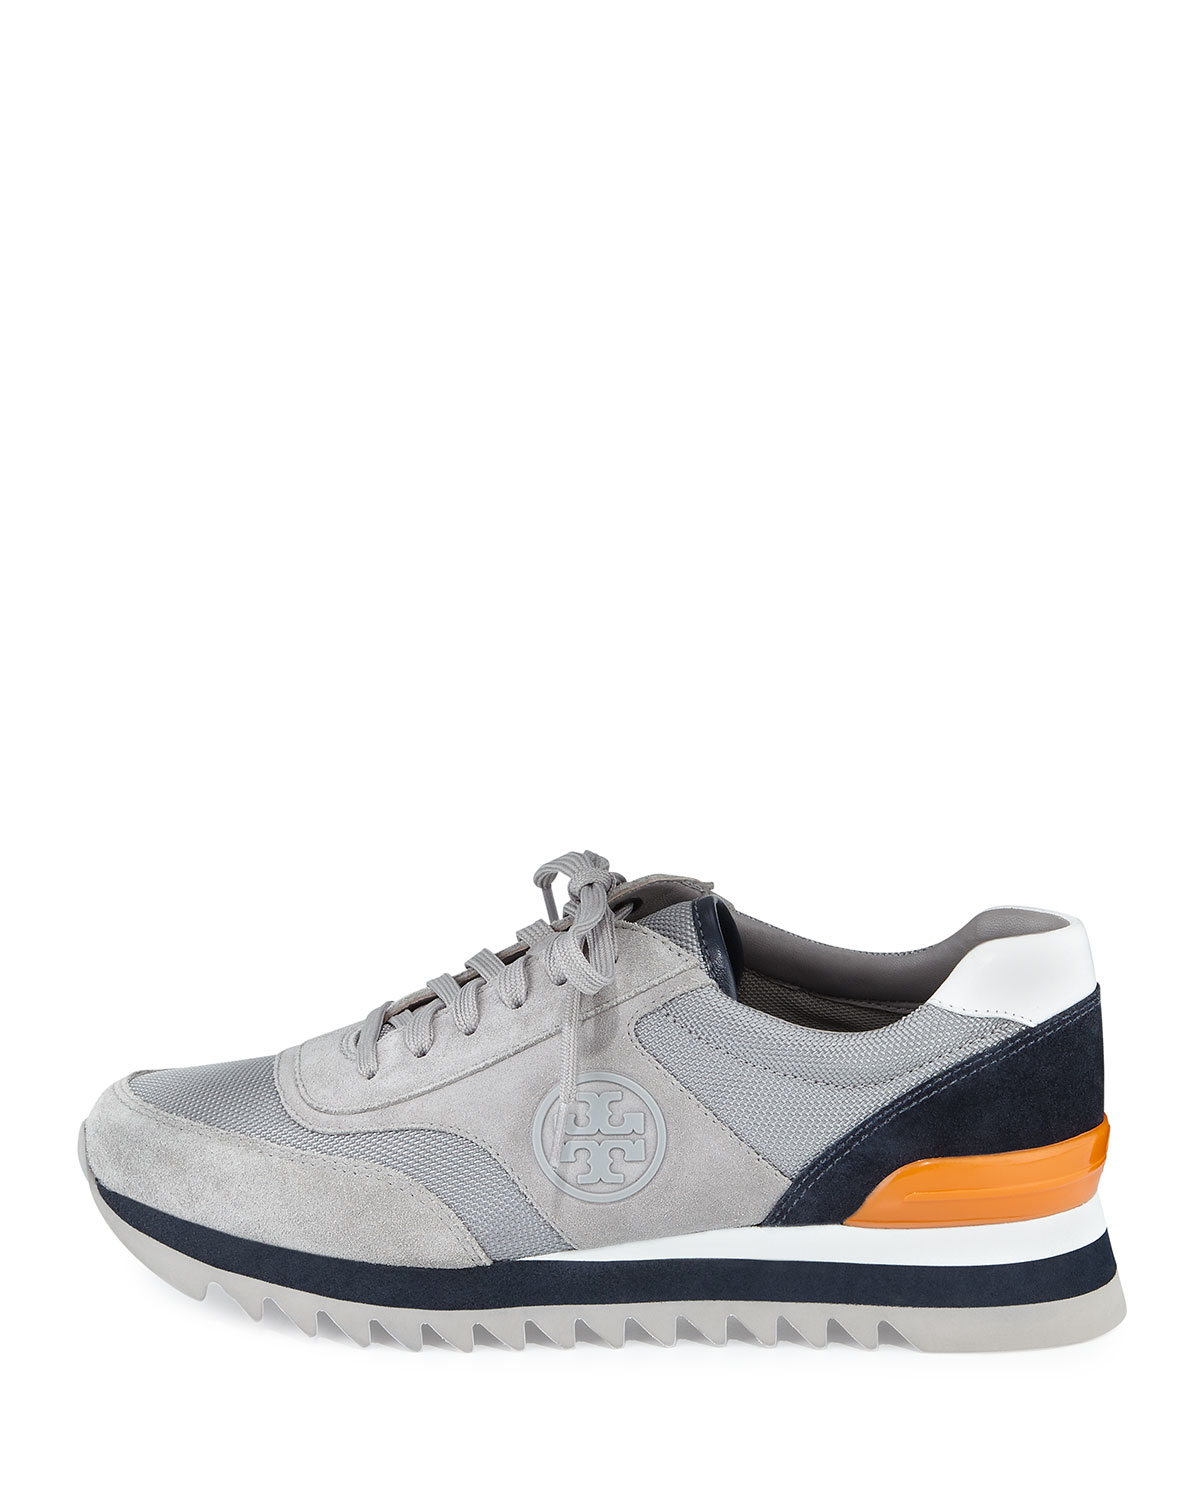 tory burch sawtooth sneakers